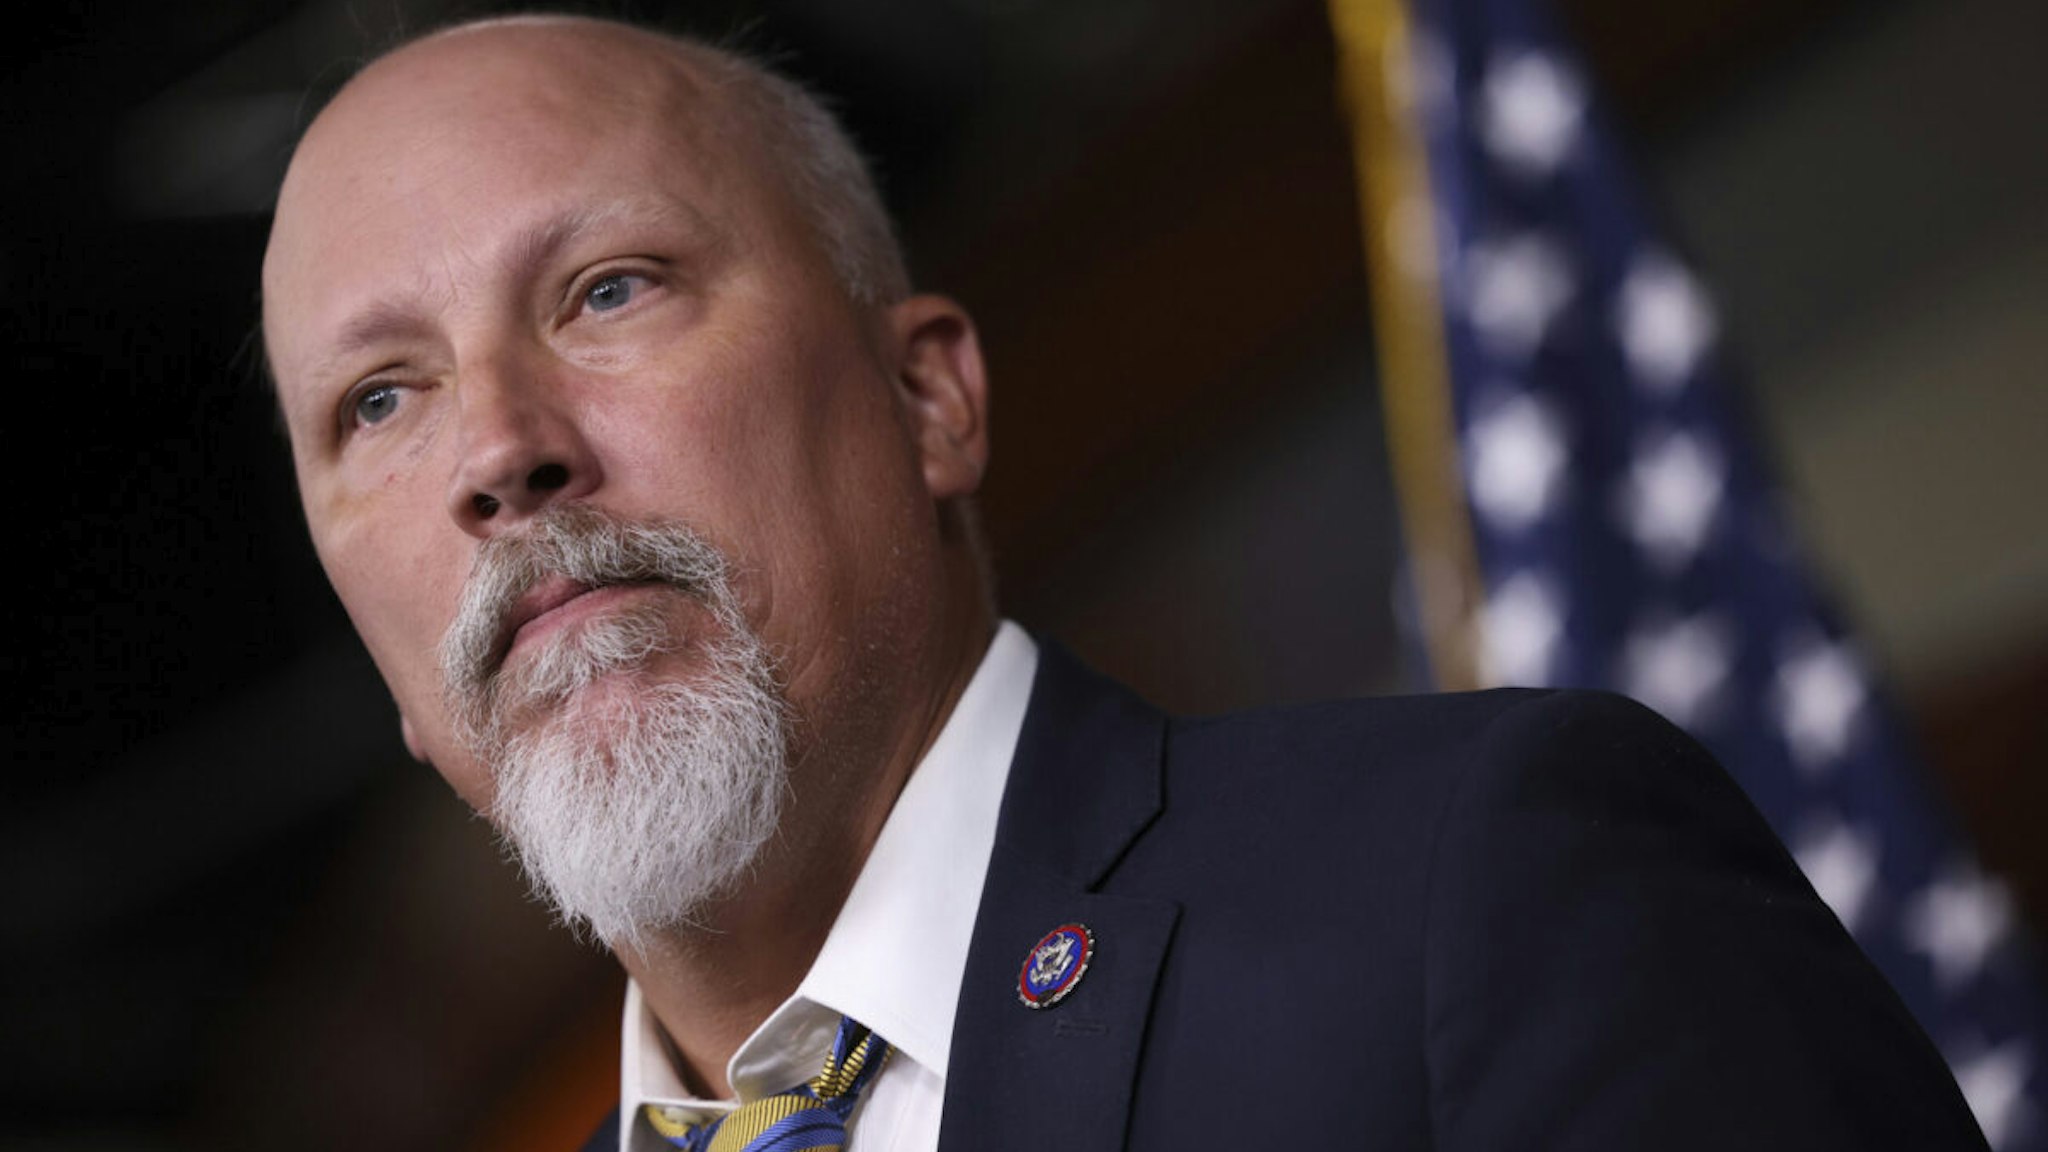 Rep. Chip Roy (R-TX) speaks at a news conference about the National Defense Authorization Bill at the U.S. Capitol on September 22, 2021 in Washington, DC.